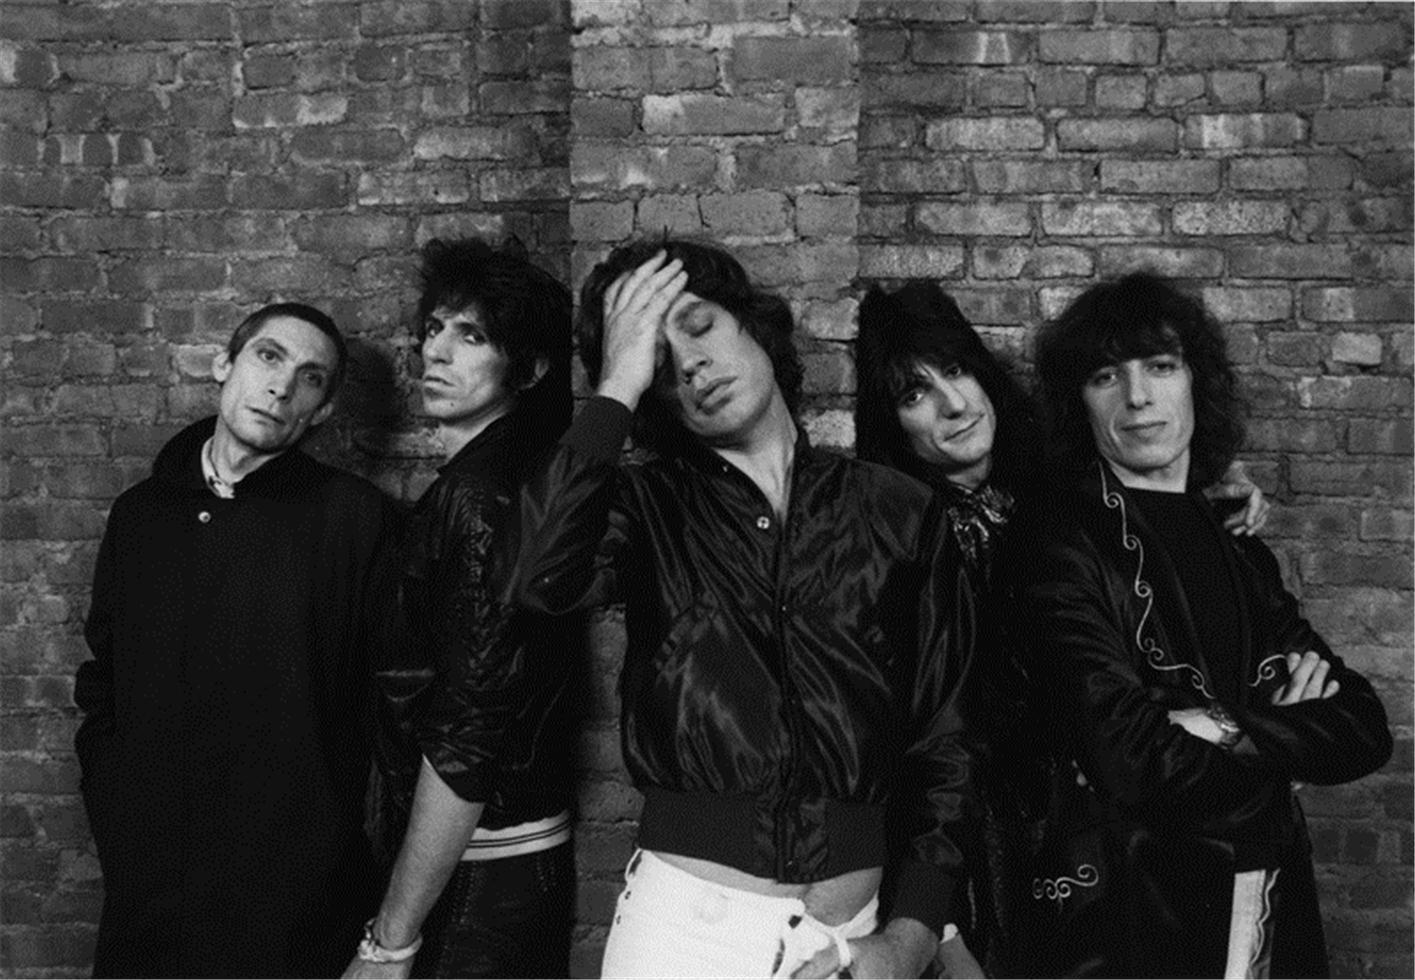 Ken Regan Black and White Photograph - The Rolling Stones, 1978